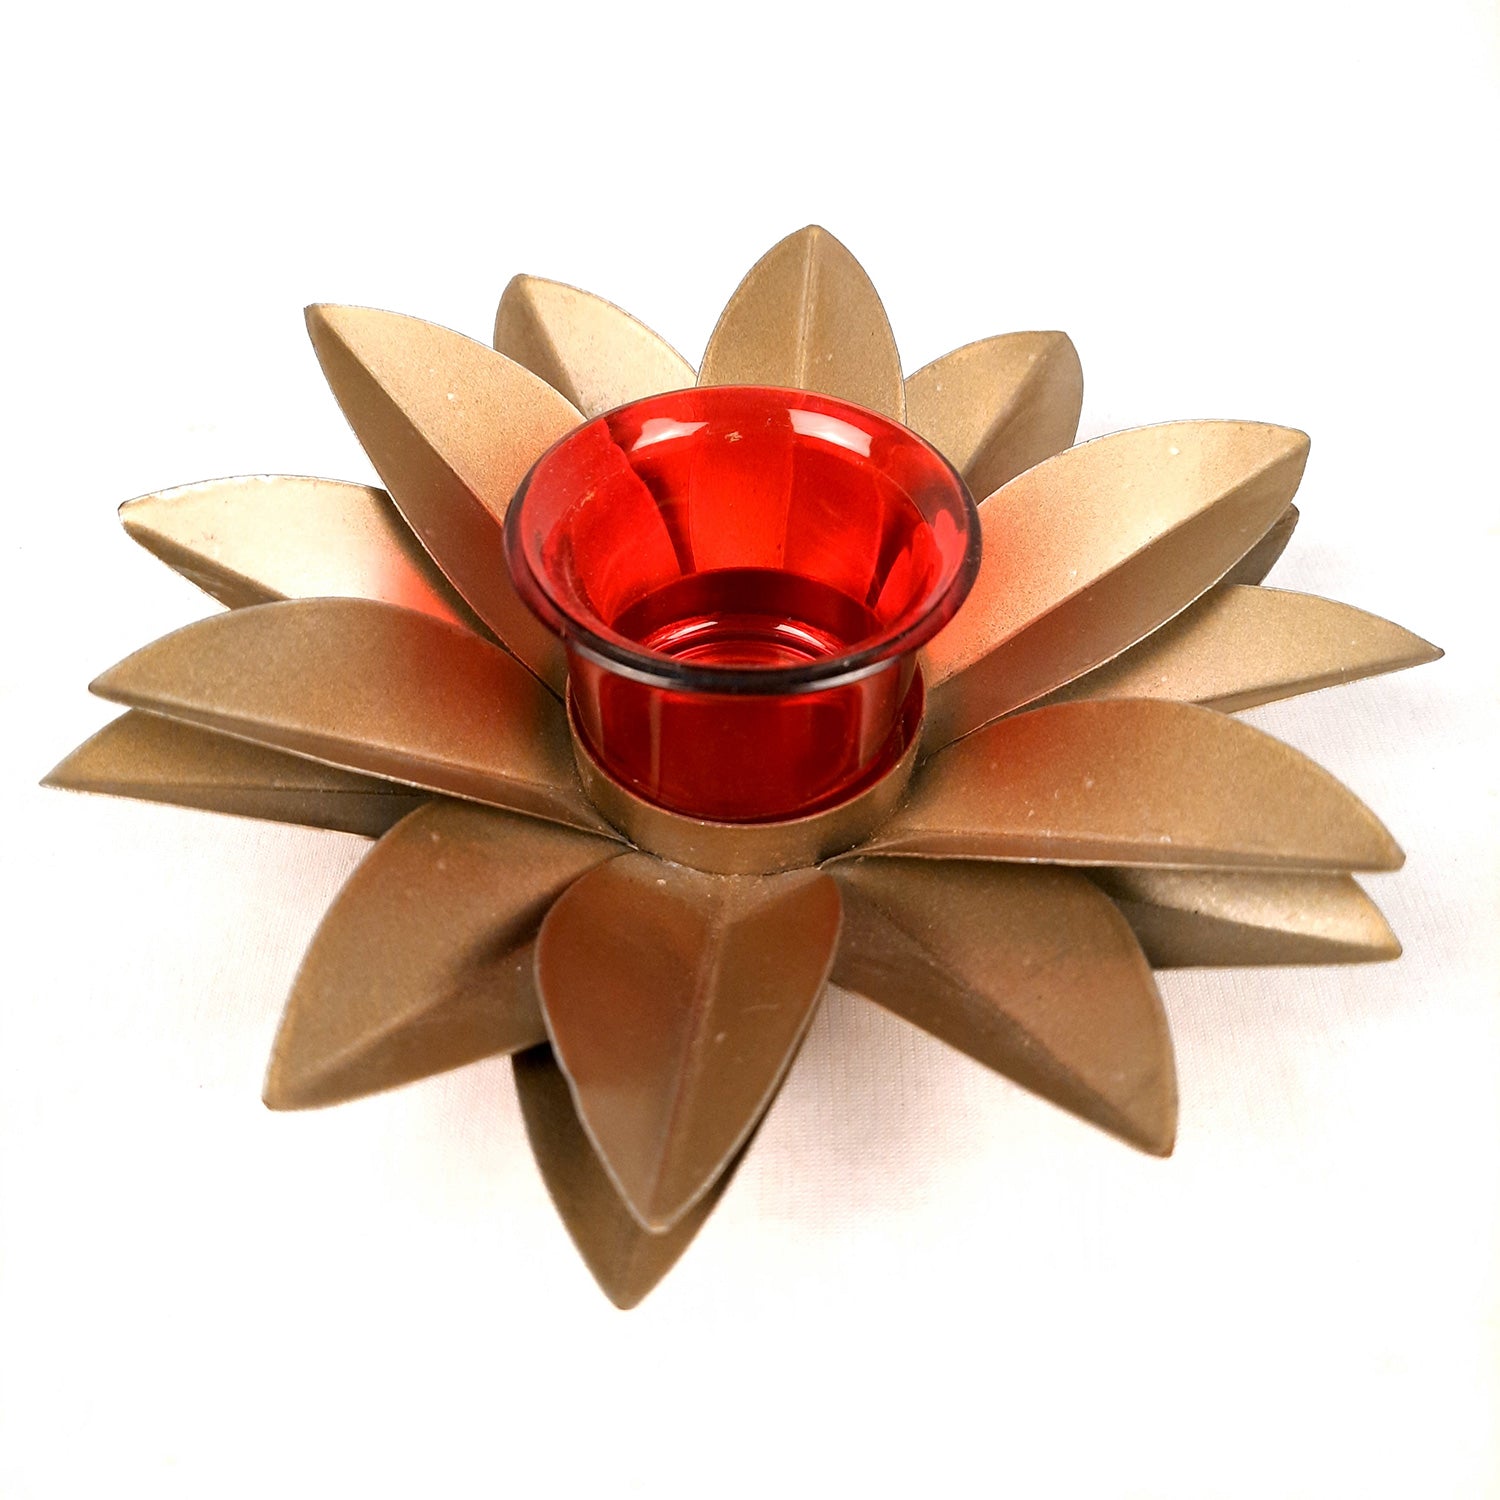 Tea Light Candle Holder - Lotus Design | Candle T Light Stand with Glass Cup - for Home, Table, Shelf, Dining Table Decor - 7 Inch - Apkamart